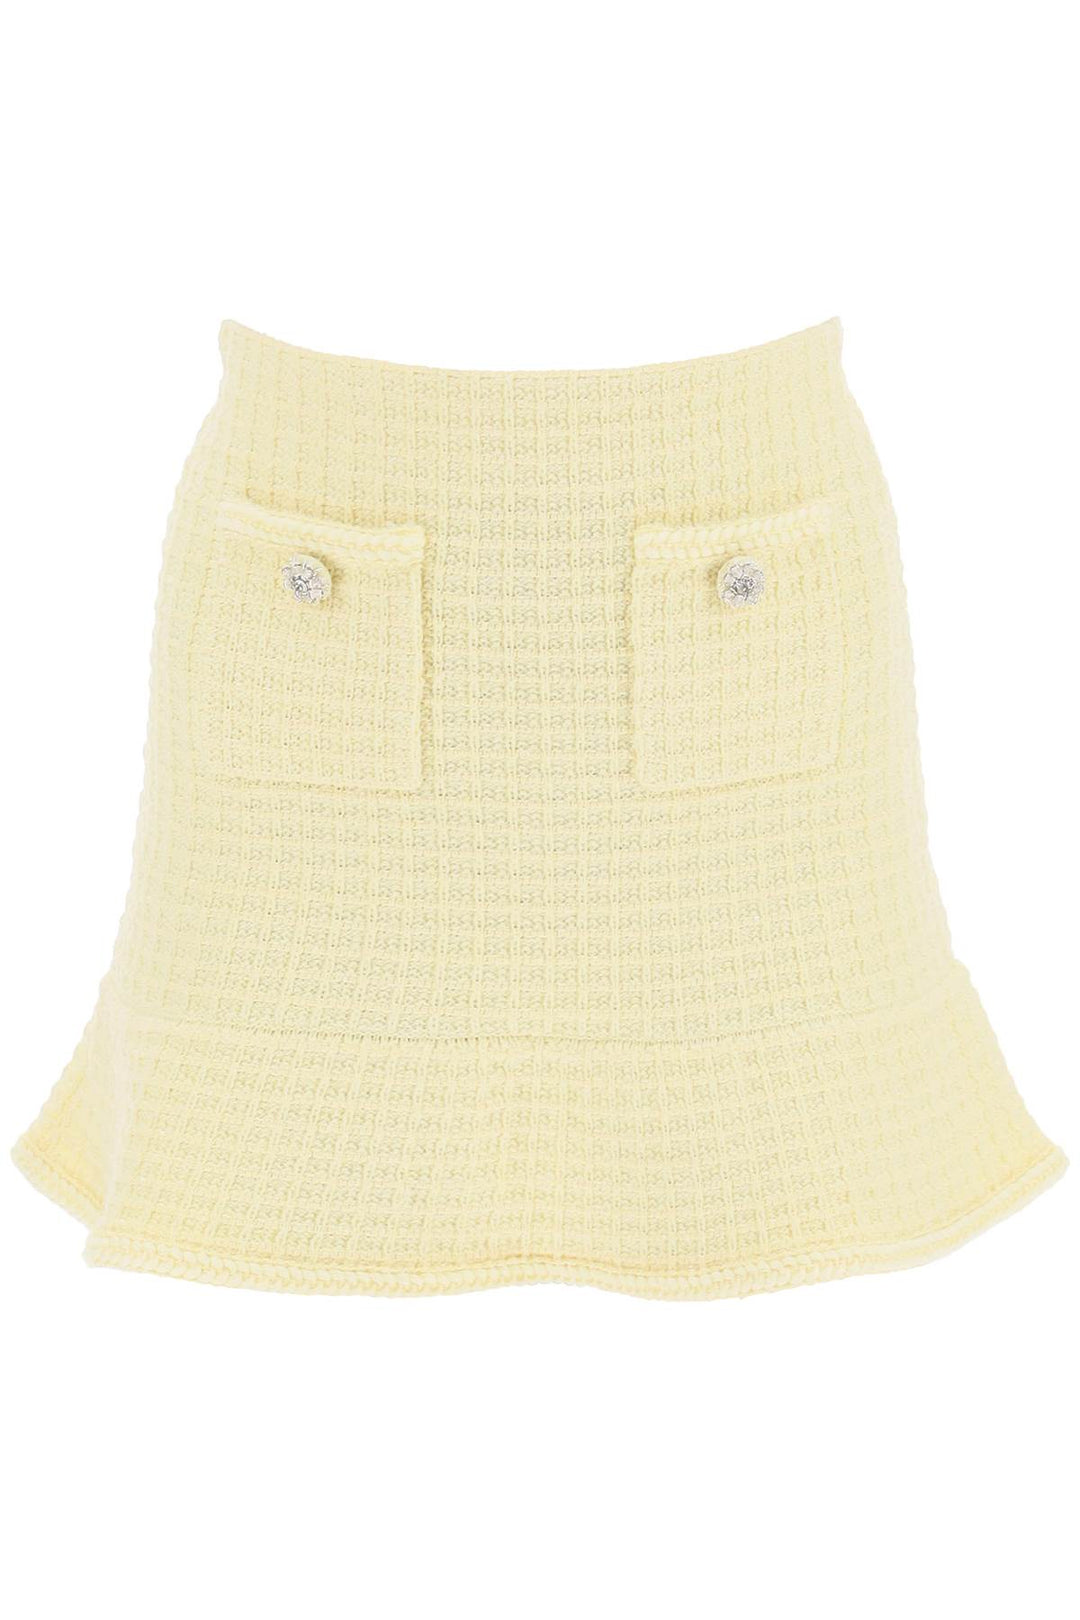 Self Portrait Replace With Double Quoteknitted Mini Skirt With Jewel Buttons   Giallo